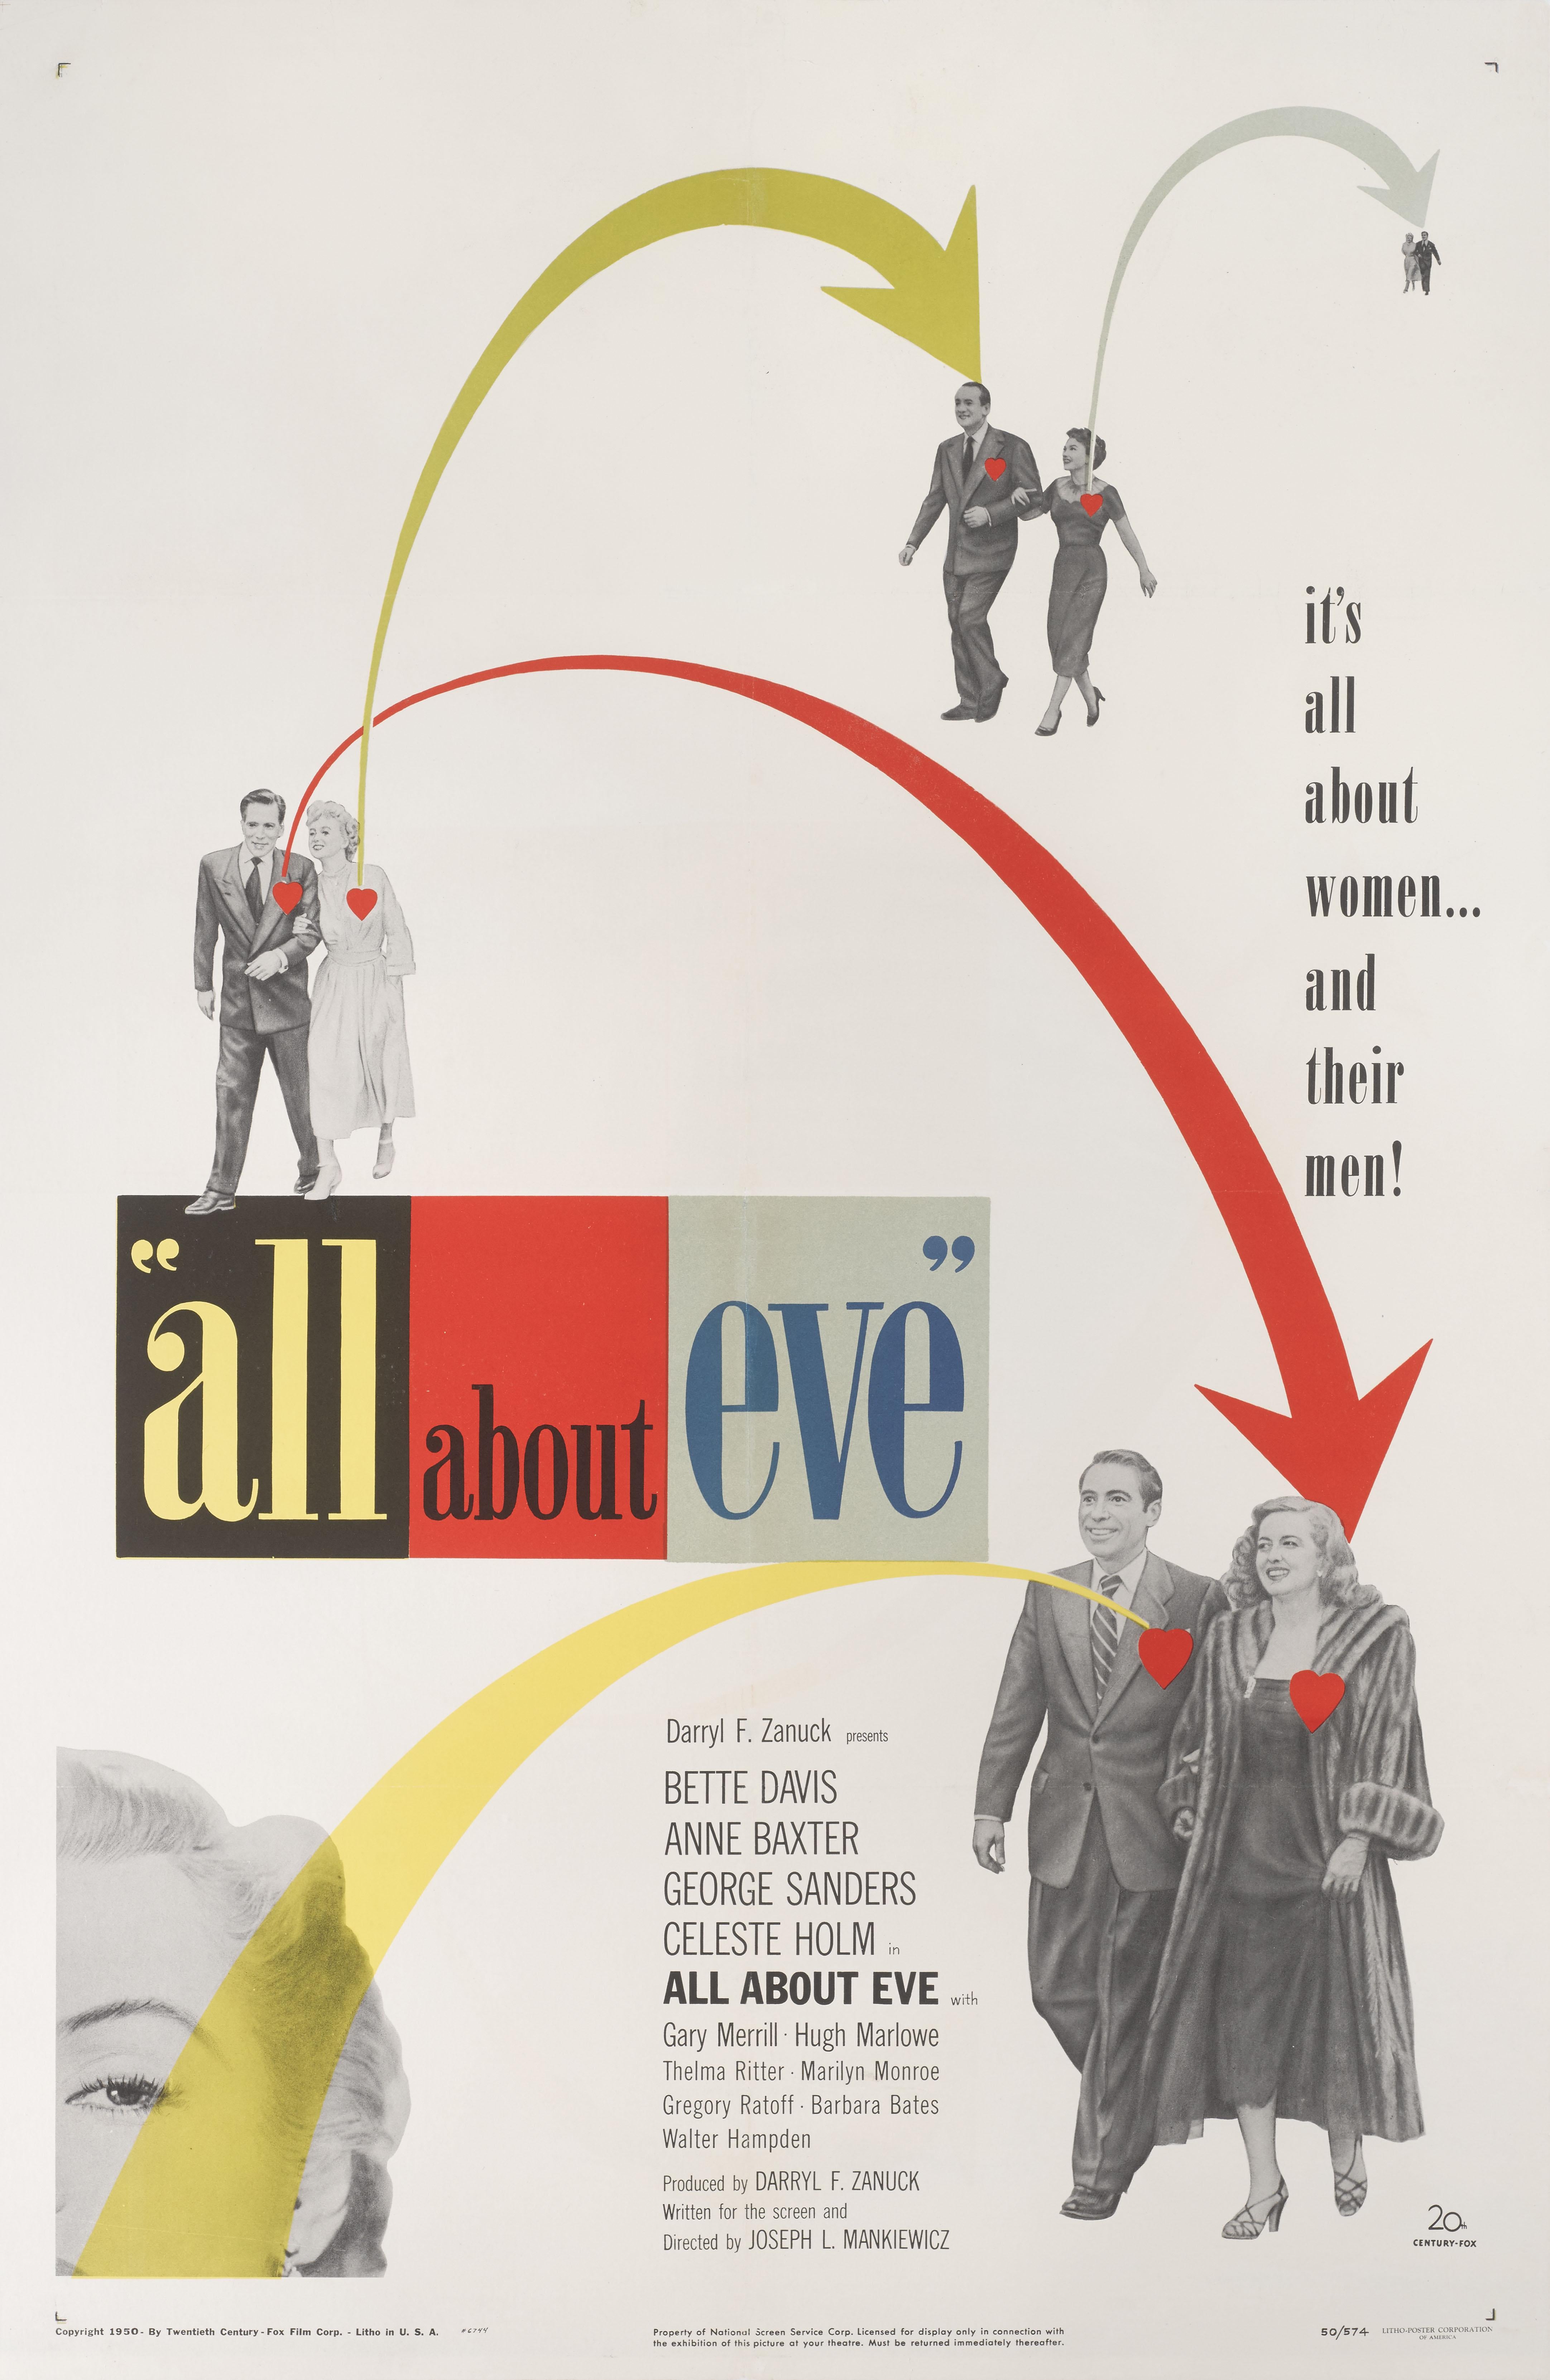 Original US film poster for the 1956 starring Bette Davis, George Sanders, Anne Baxter and  Marilyn.
This film was directed by Joseph L. Mankiewicz.
The art work on this poster is by the Swiss pioneer of design Erik Nitsche (1908-1998)
This poster